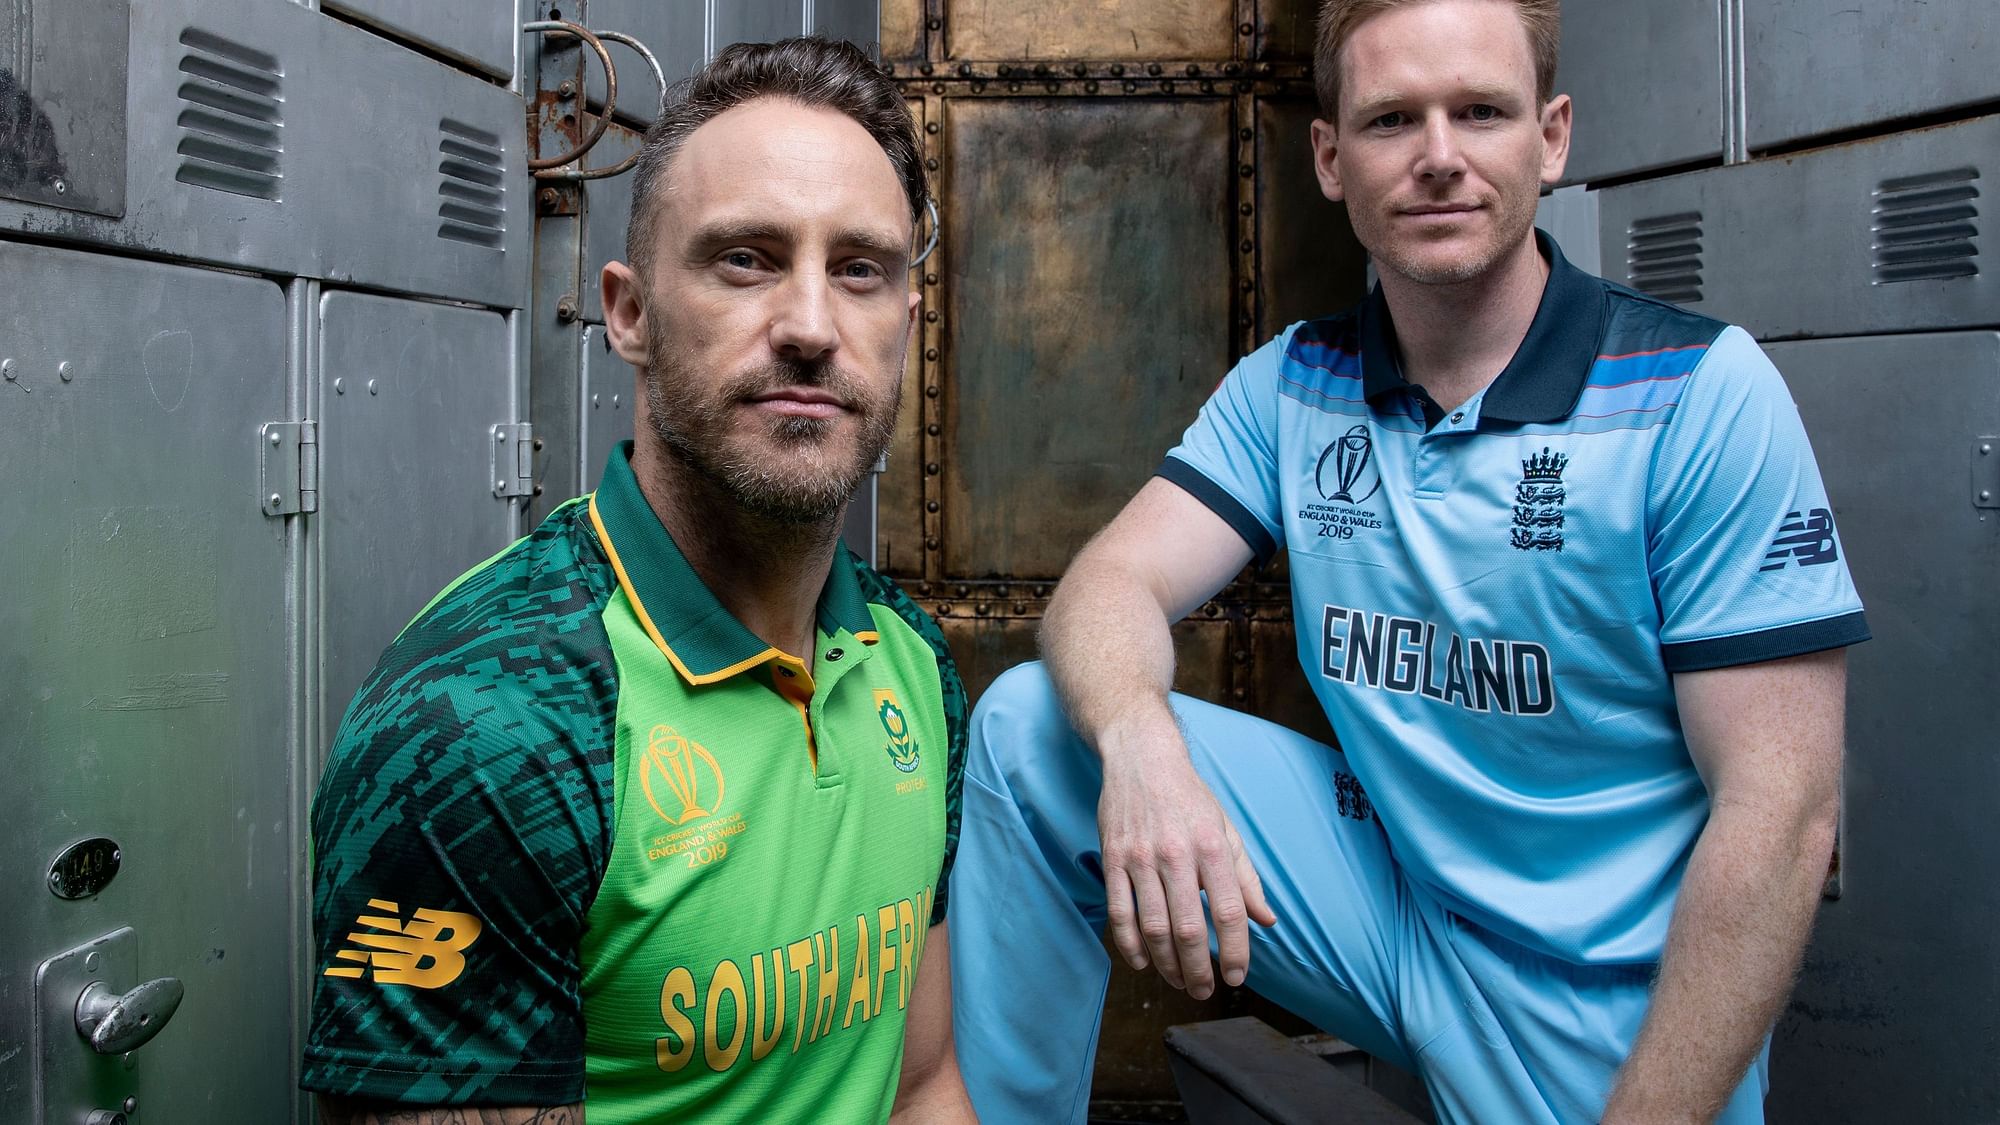 South Africa captain Faf du Plessis and England captain Eoin Morgan ahead of their ICC World Cup opener.